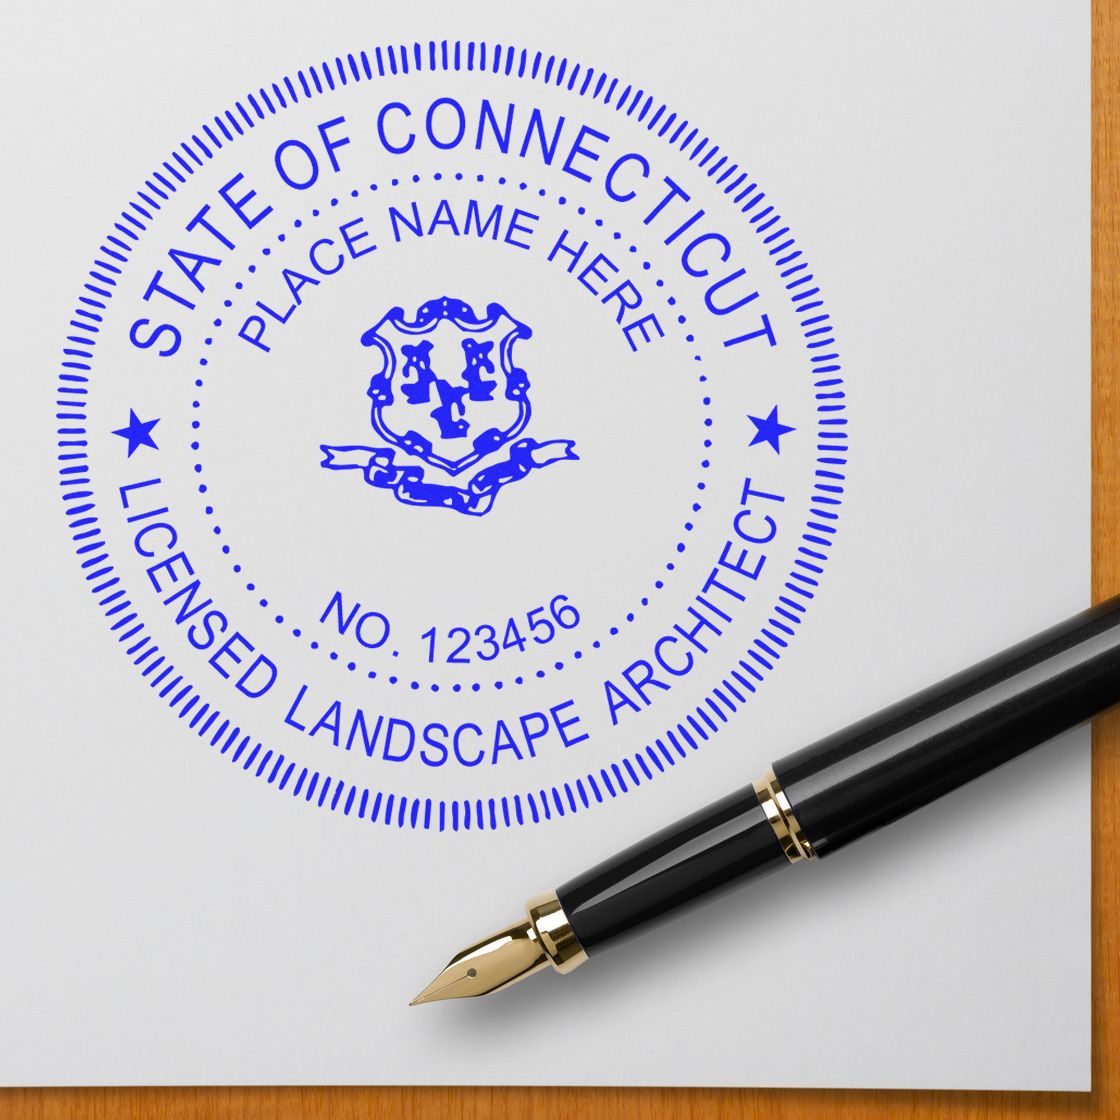 This paper is stamped with a sample imprint of the Self-Inking Connecticut Landscape Architect Stamp, signifying its quality and reliability.